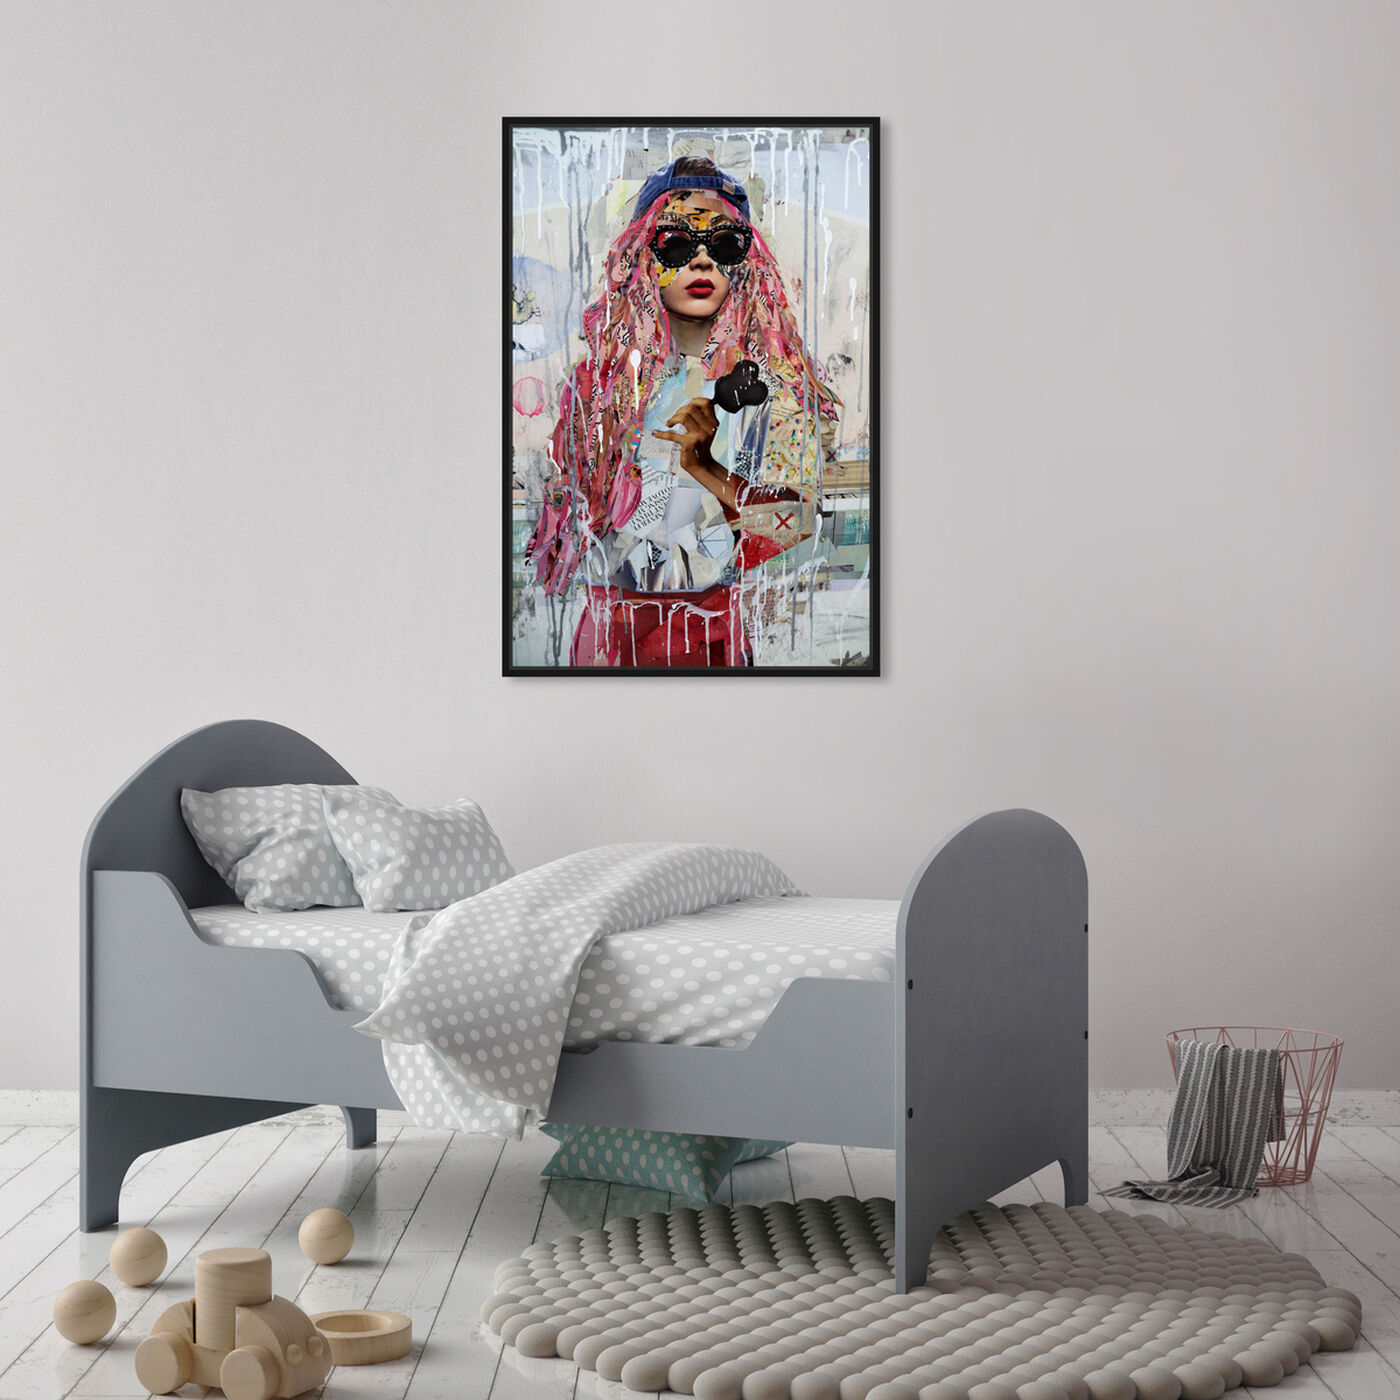 Hanging view of Katy Hirschfeld - Urban Streetwise Glam featuring fashion and glam and portraits art.